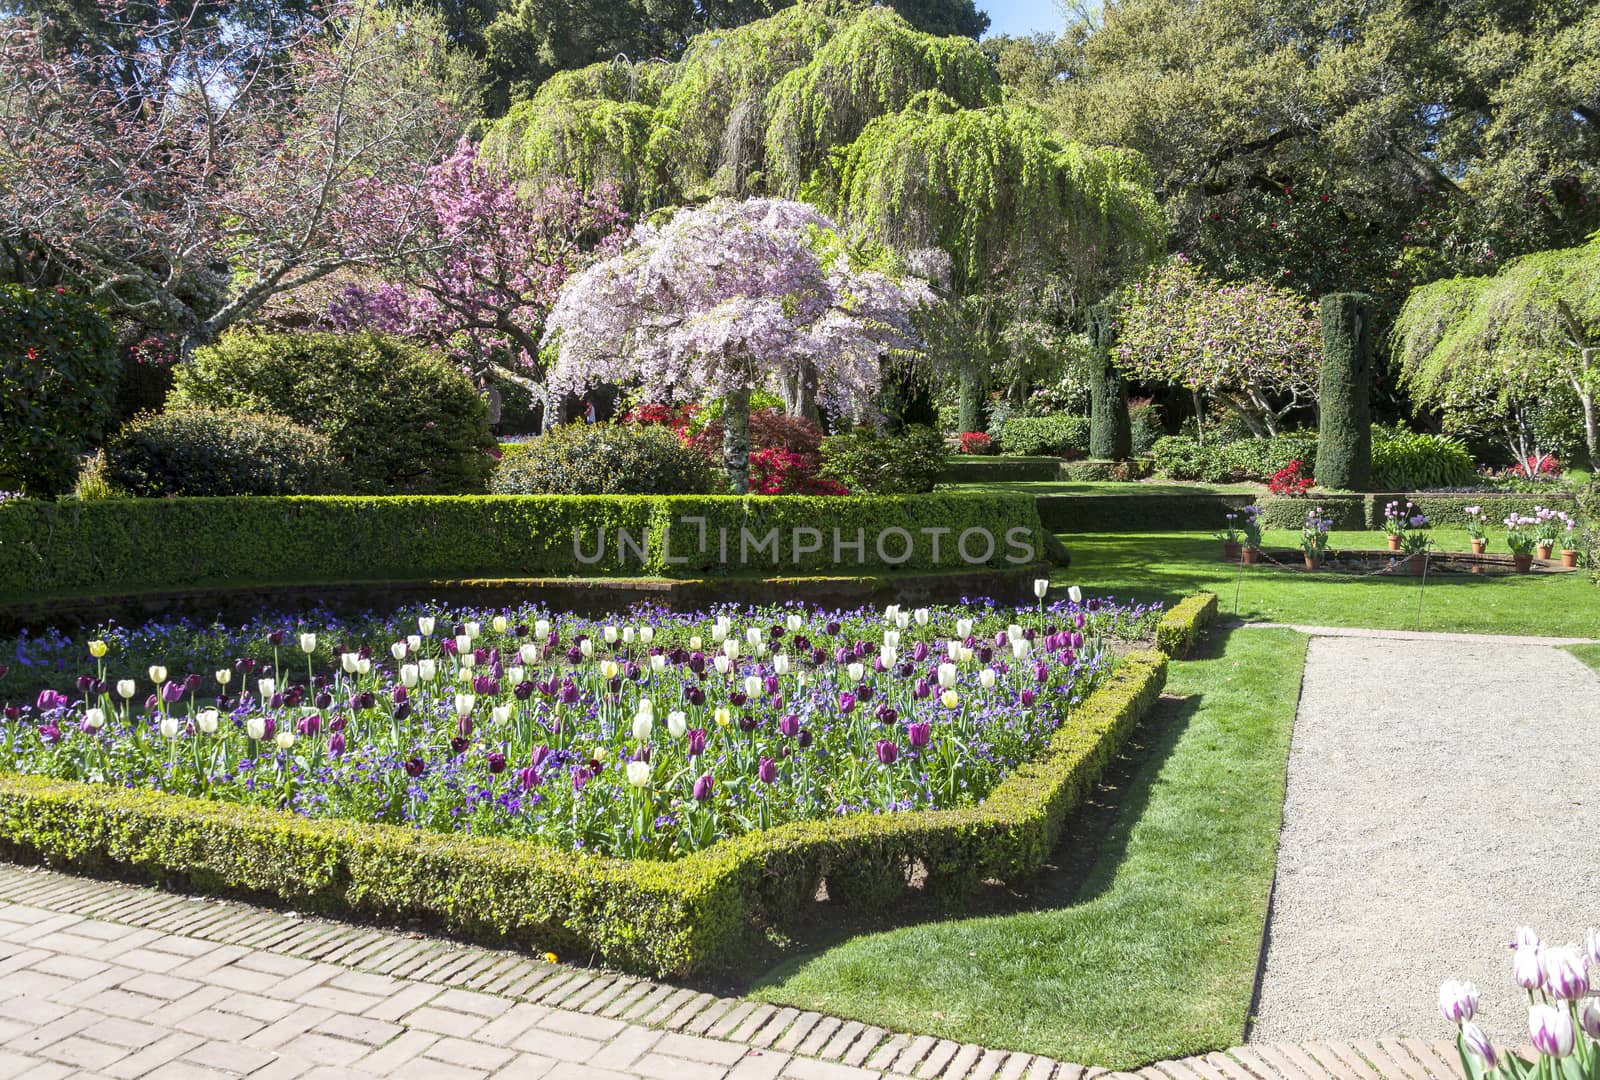 This image was taken at a formal garden near San Francisco, California. Spring had arrived, and the tulips as well as most of the trees were in mid bloom.